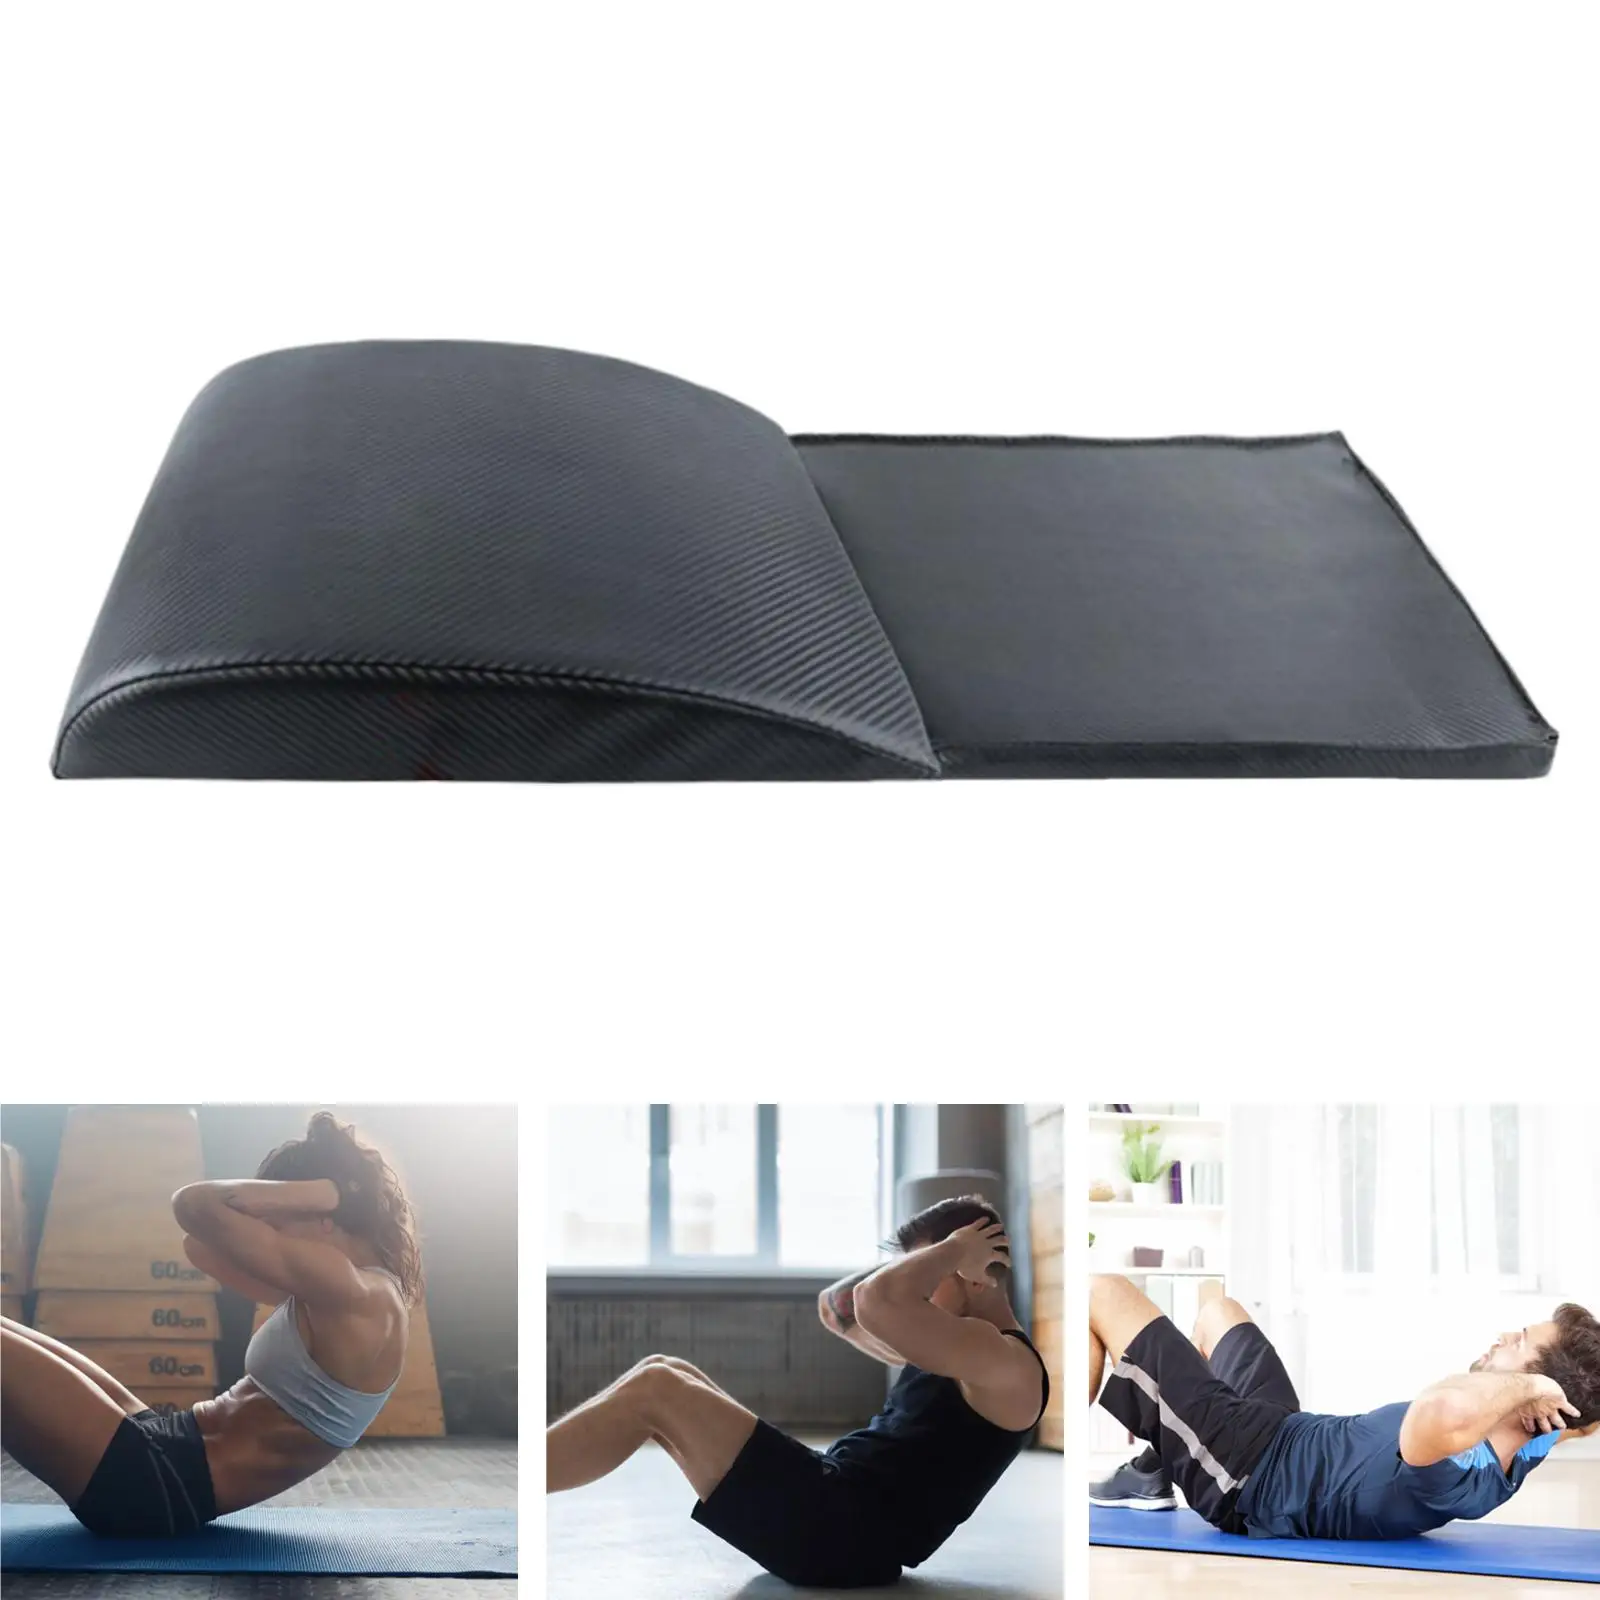 Abdominal Exercise Mat Sit Up Benches Abdominal & Core Trainer Ab Mat for Full Range of Motion Belly Workouts Fitness Equipment